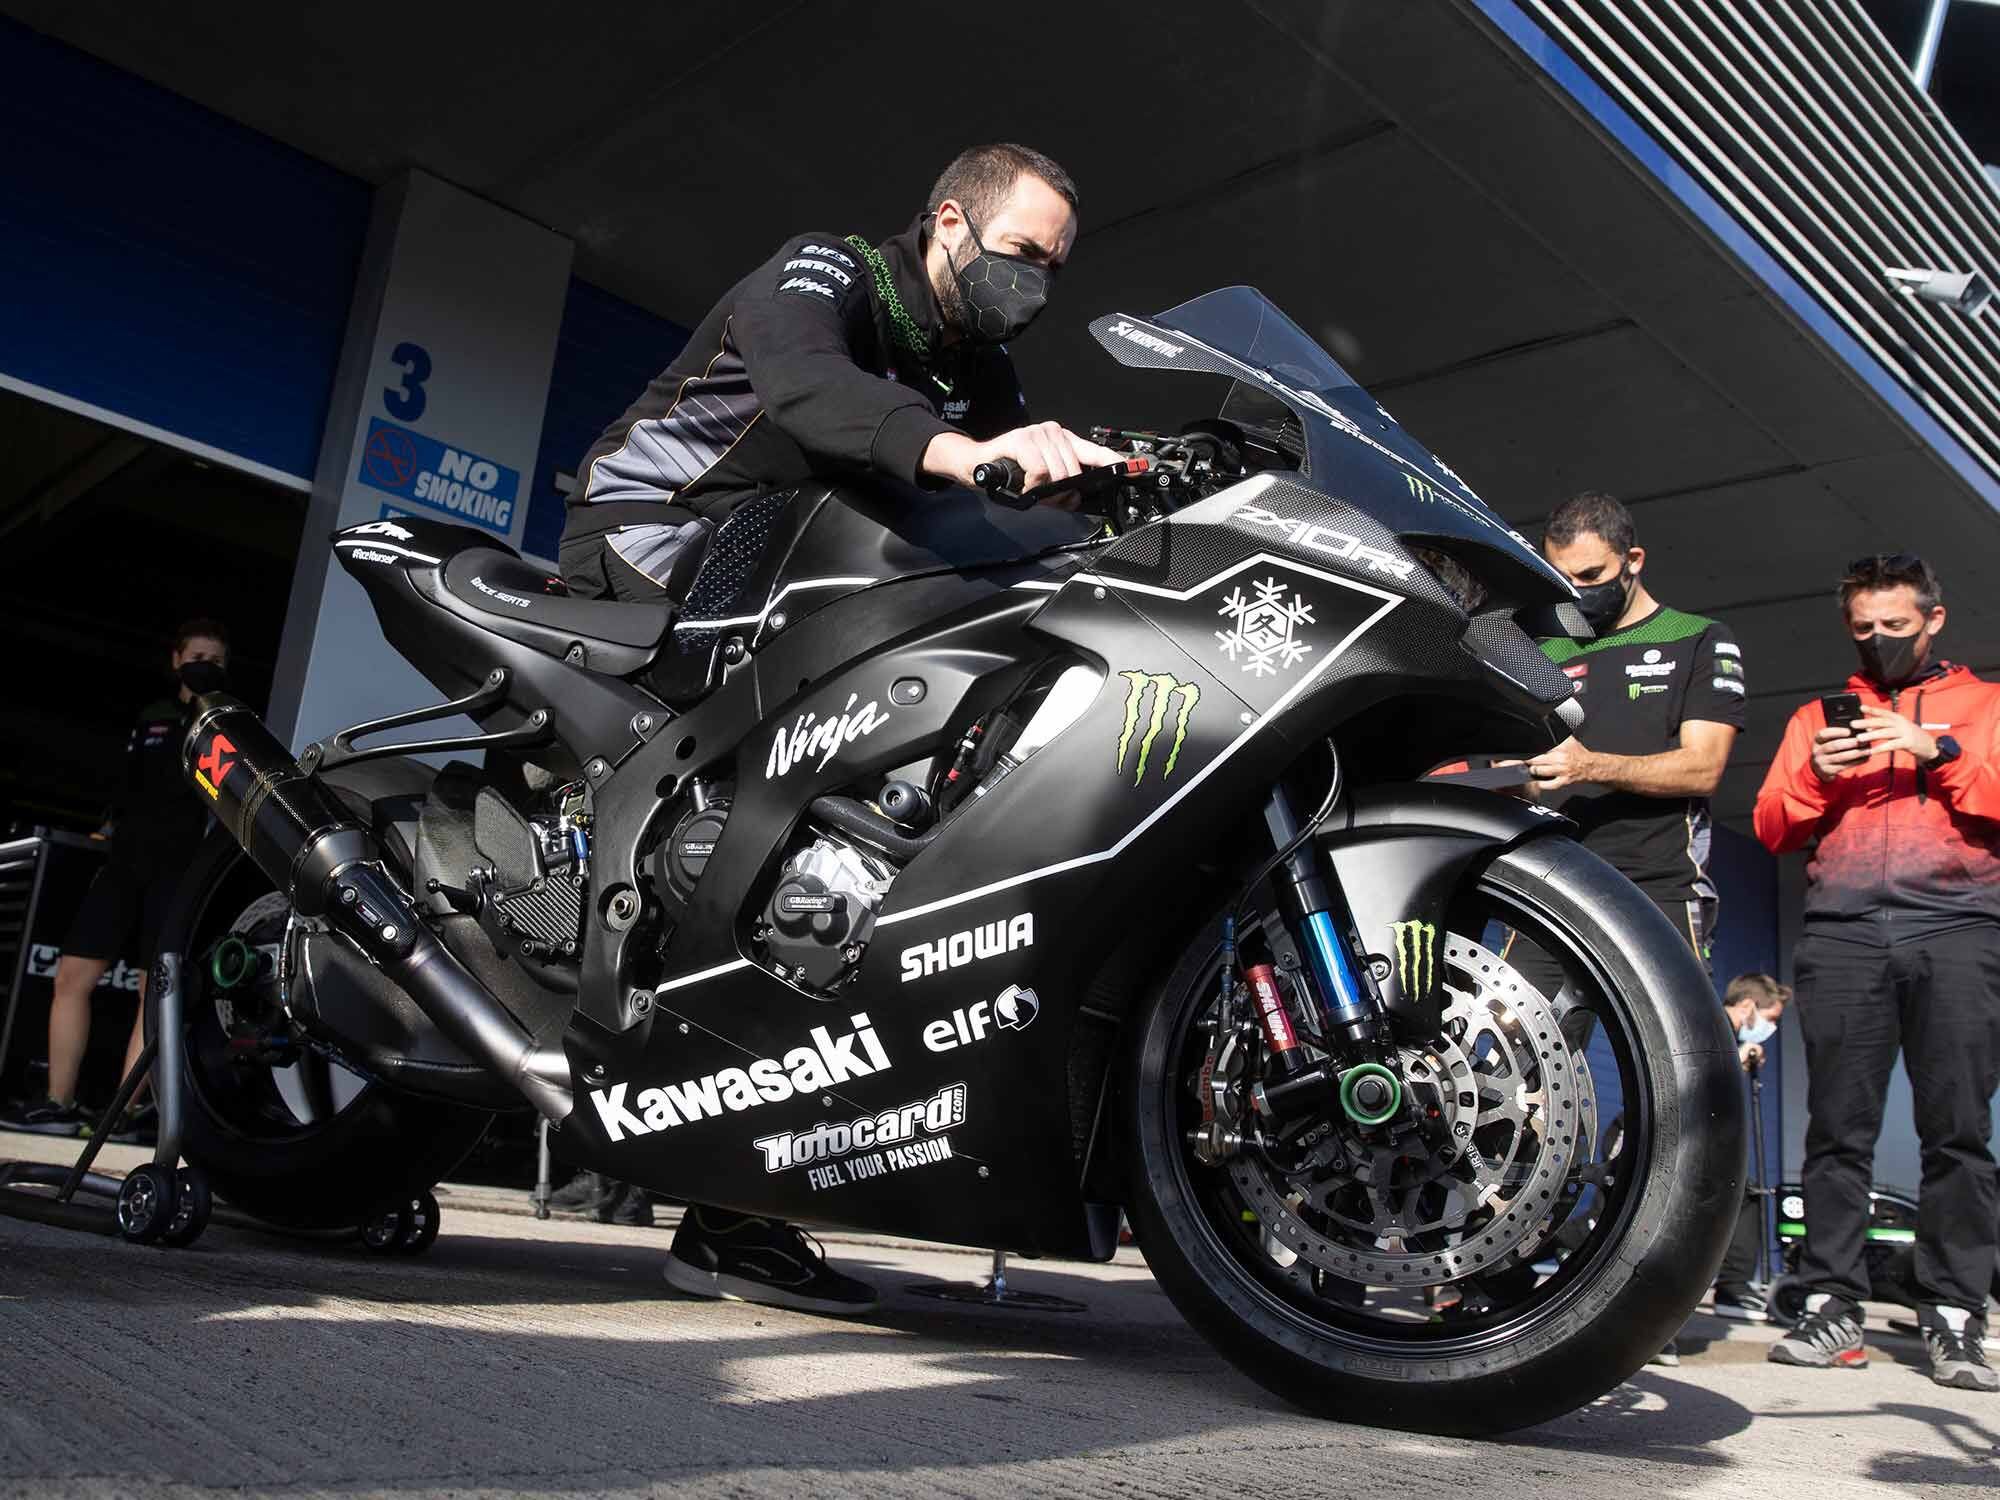 New images of the upcoming Kawasaki ZX-10RR in World SBK racing trim show mostly skin-deep changes for 2021.